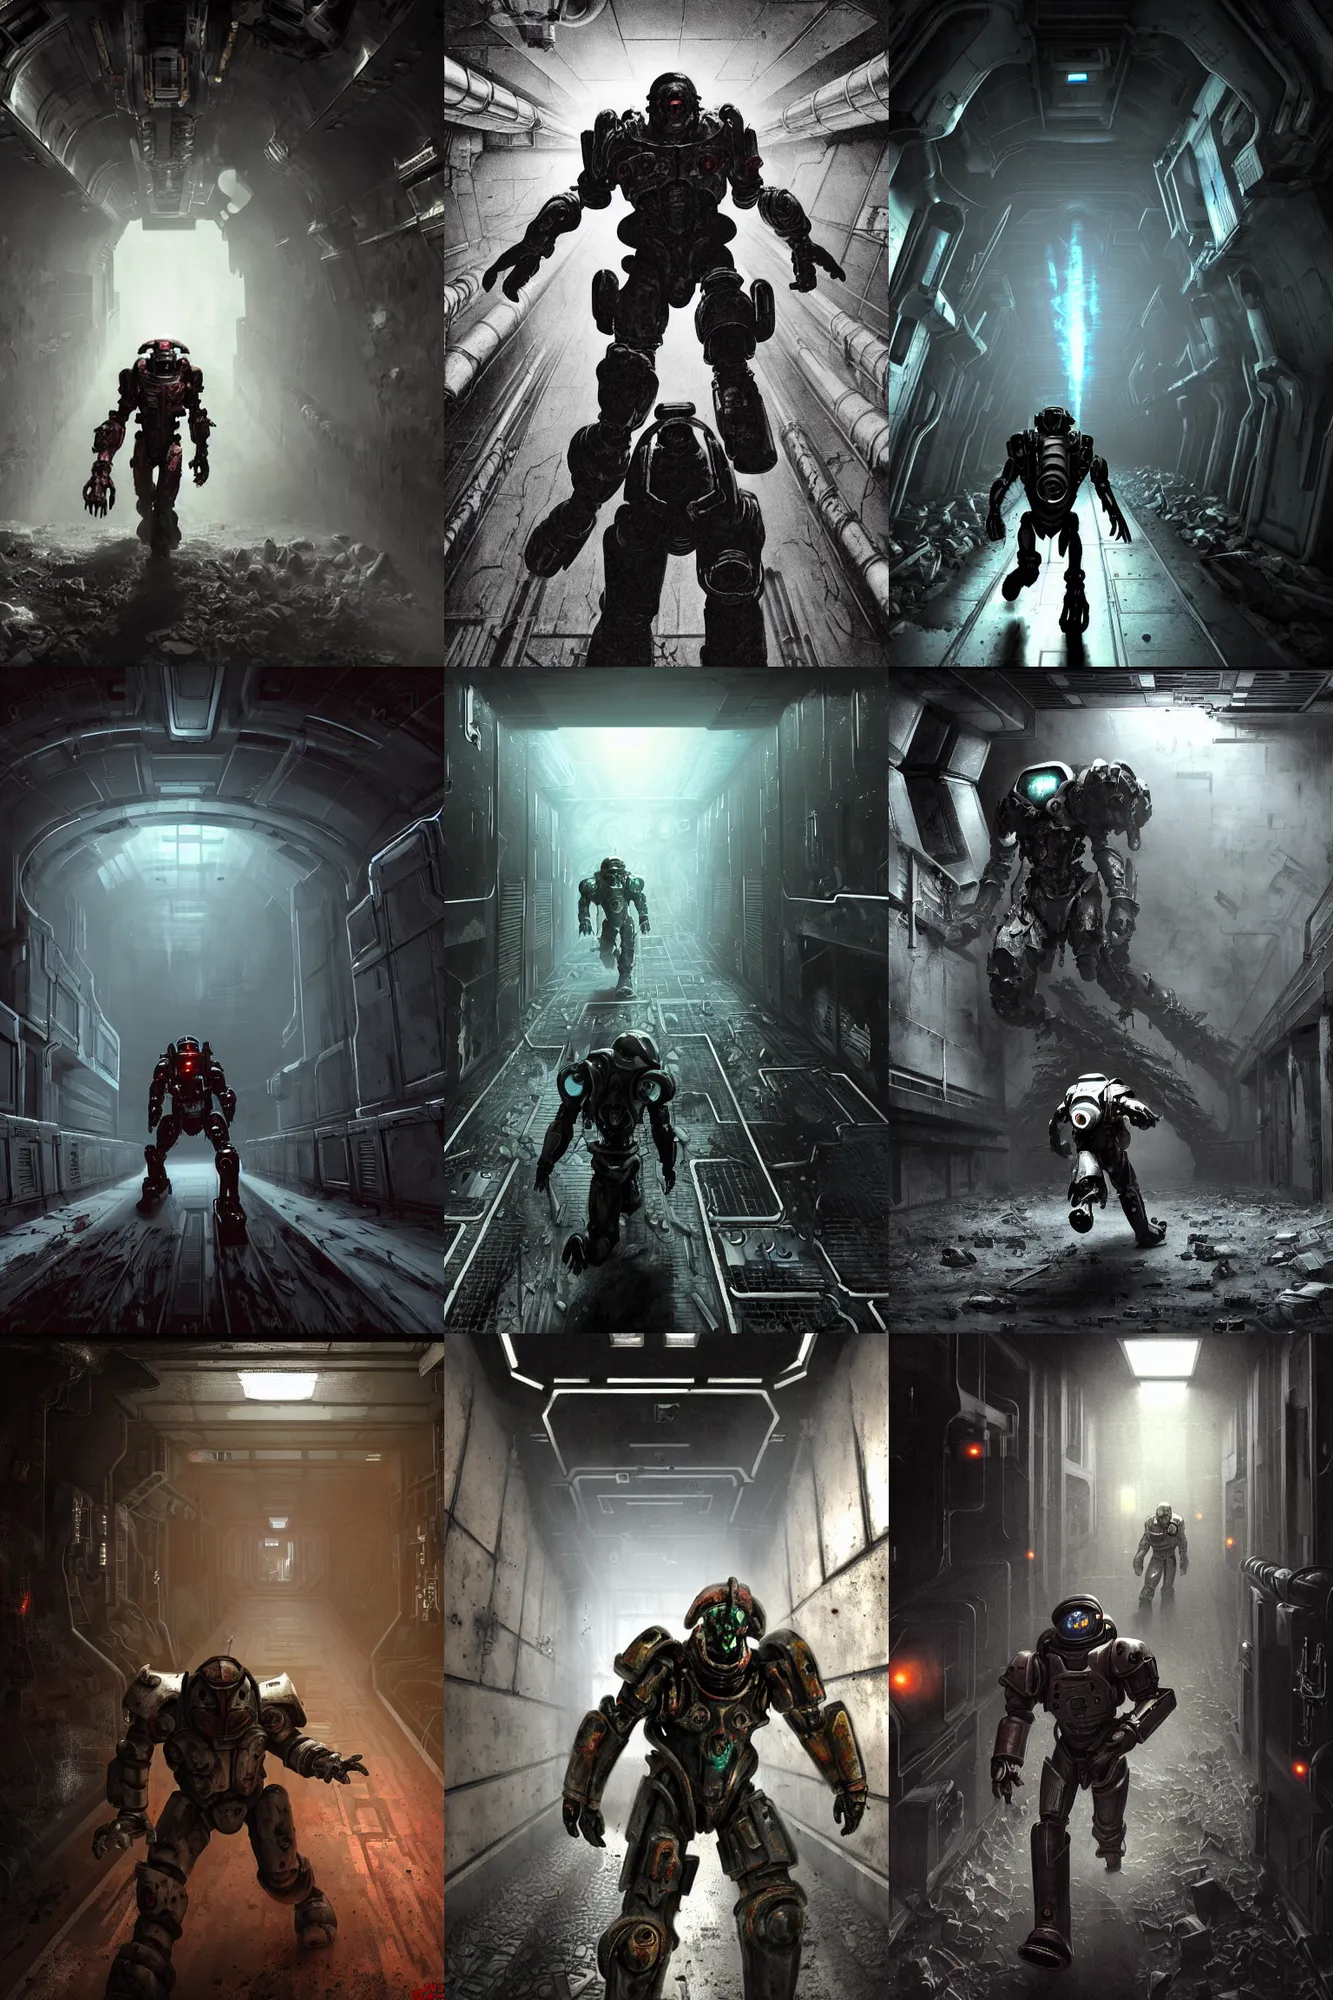 Prompt: horror movie scene of an individual in futuristic power armor being chased down a hallway, running through a desolate deep space mining station, rusty metal walls, broken pipes, dark colors, muted colors, tense atmosphere, mist floats in the air, amazing value control, dead space, moody colors, dramatic lighting, ussg ishimura, frank frazetta